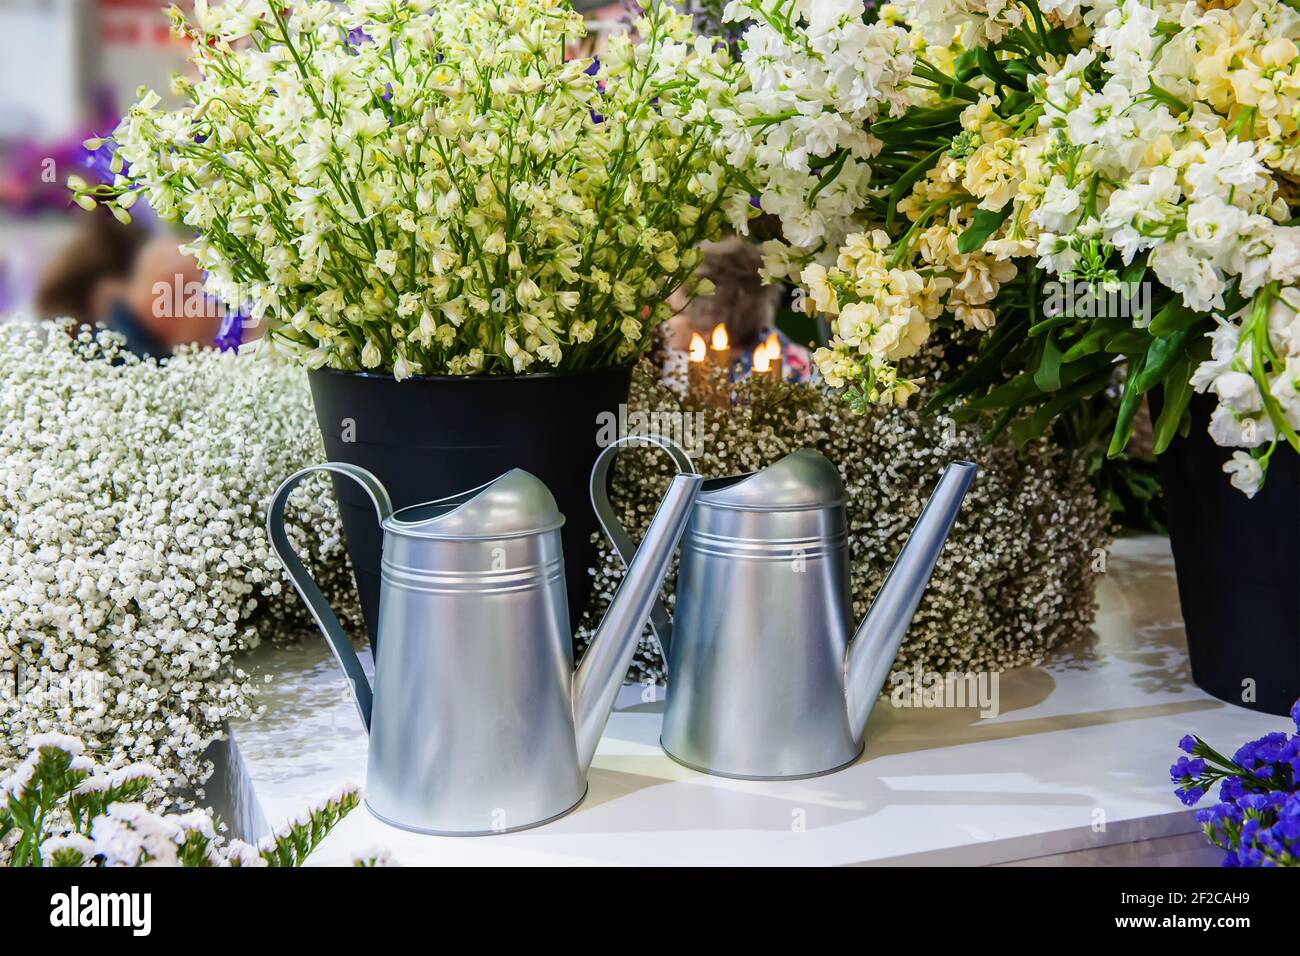 Garden metal watering cans are sold in the hardware store on the retail shelf. the concept of care for indoor and garden plants. Stock Photo